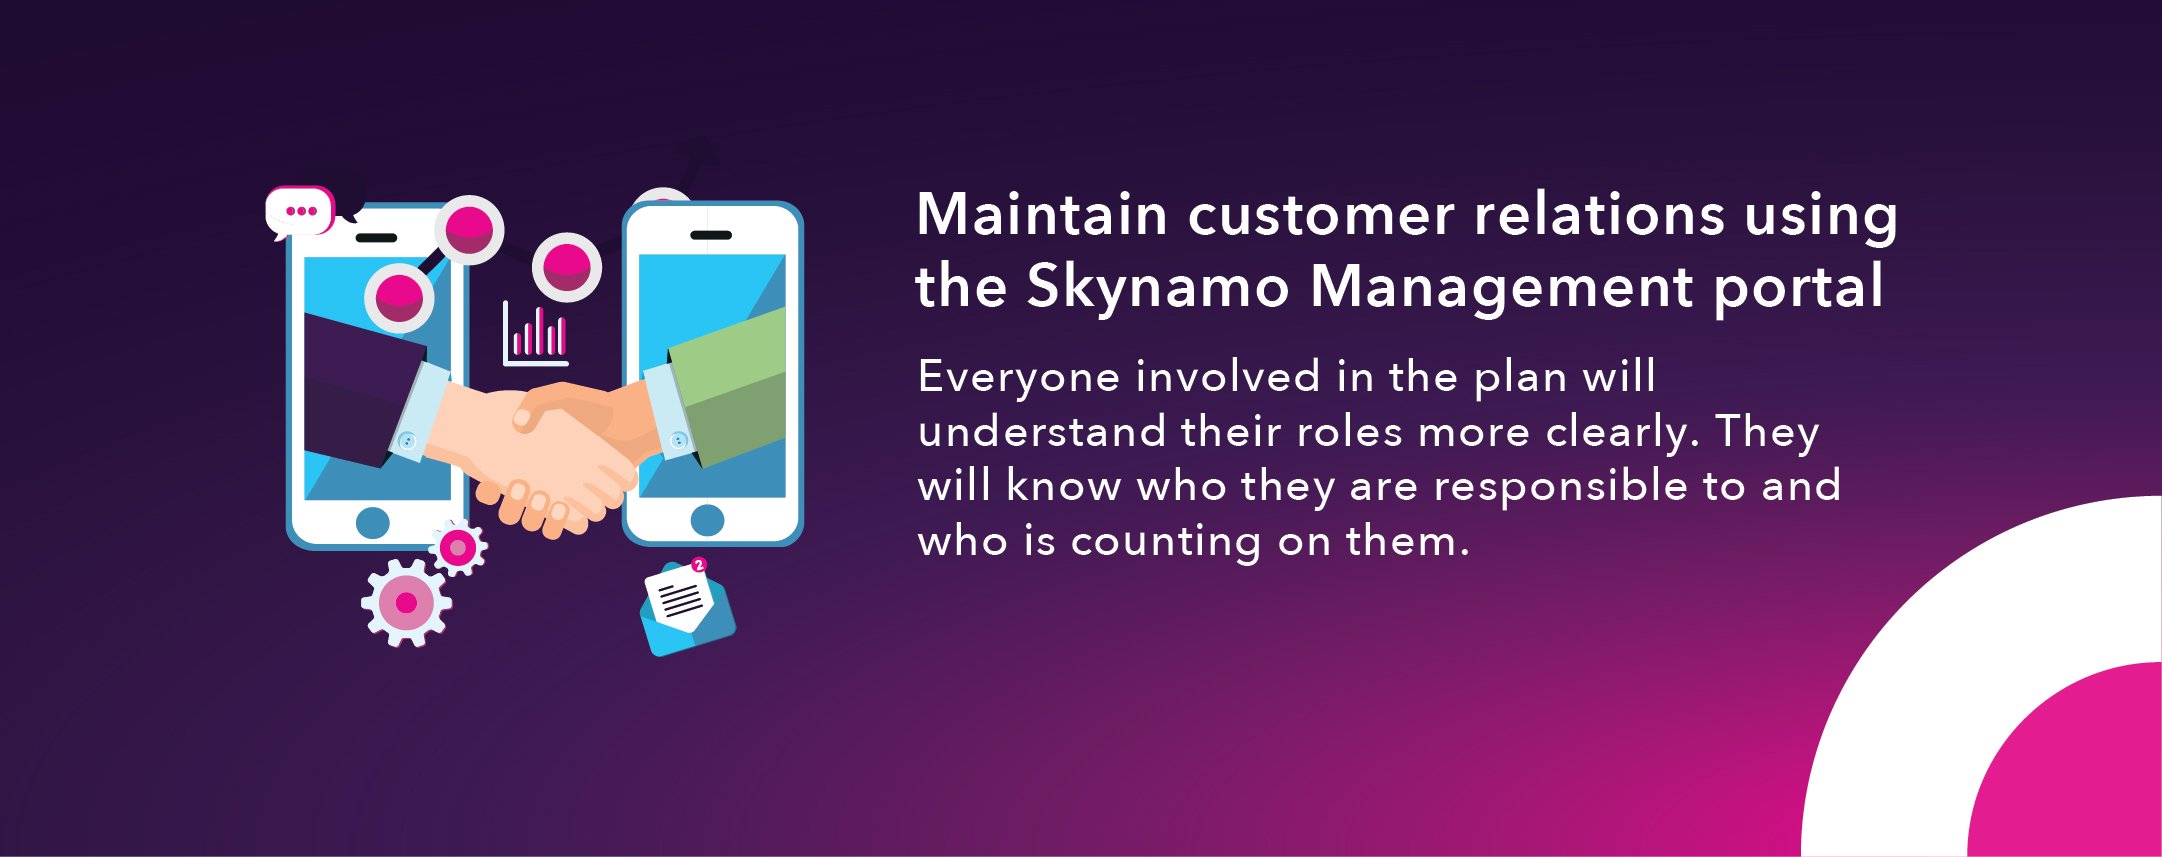 5. Maintain and strengthen customer relationships using the Skynamo Management portal